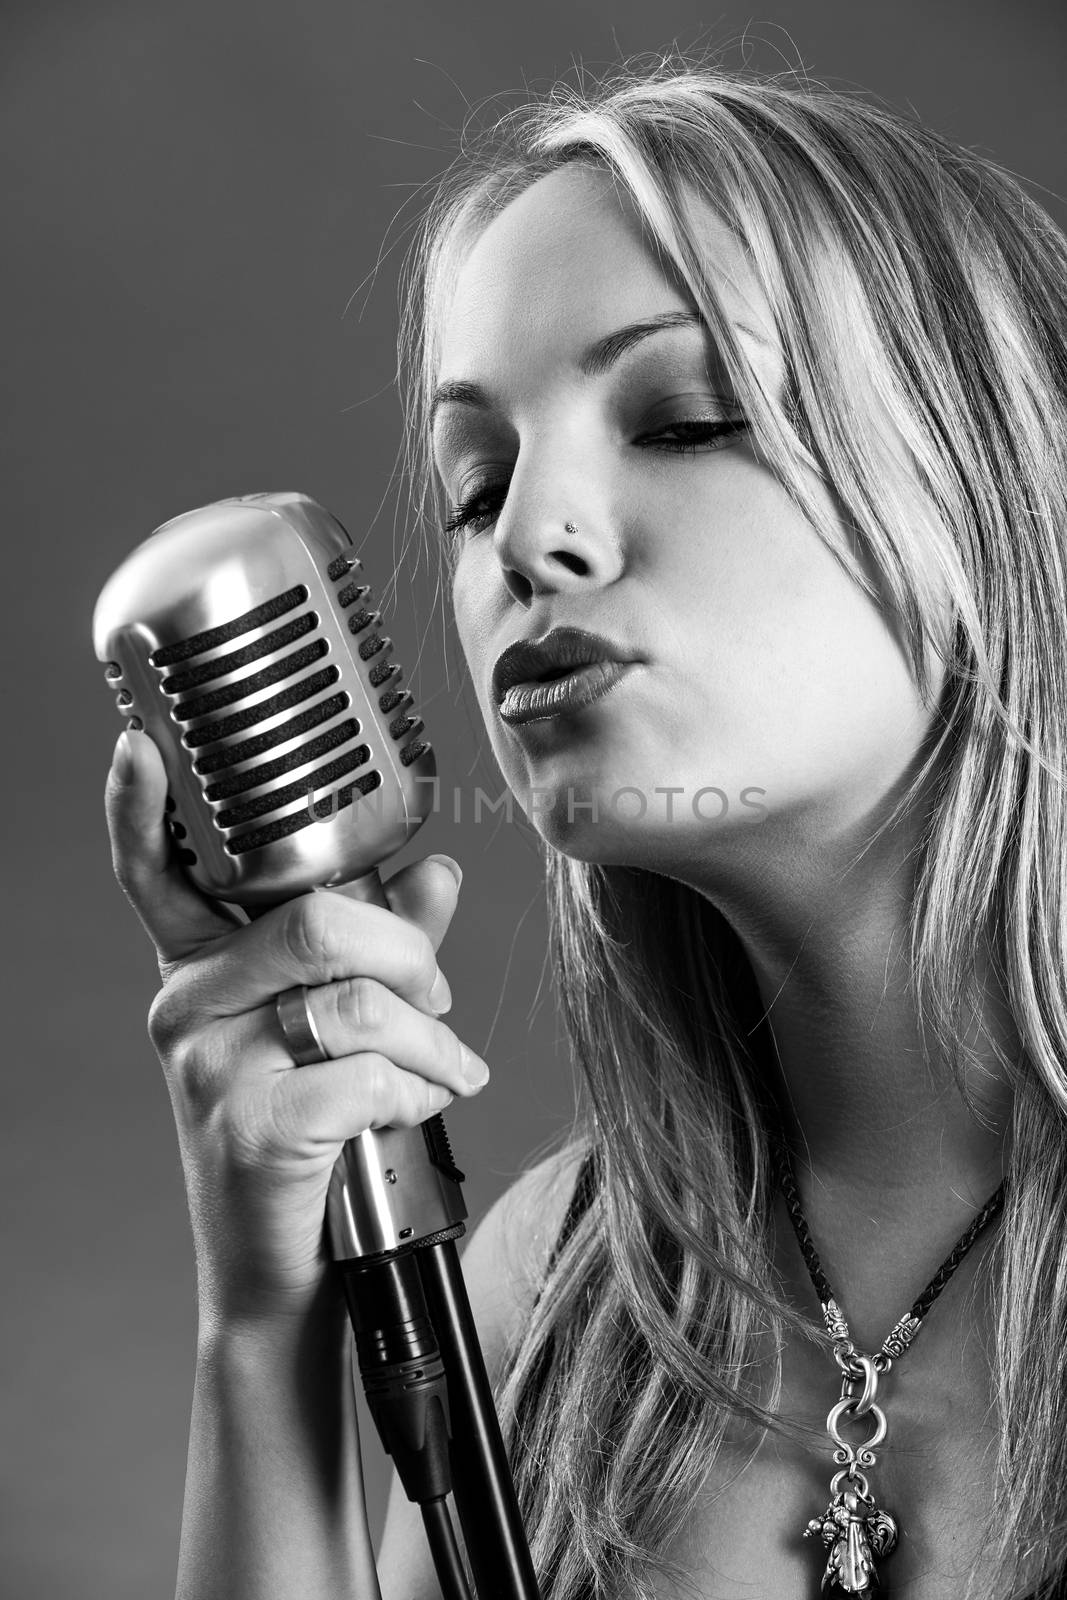 Blond singing with vintage microphone by sumners